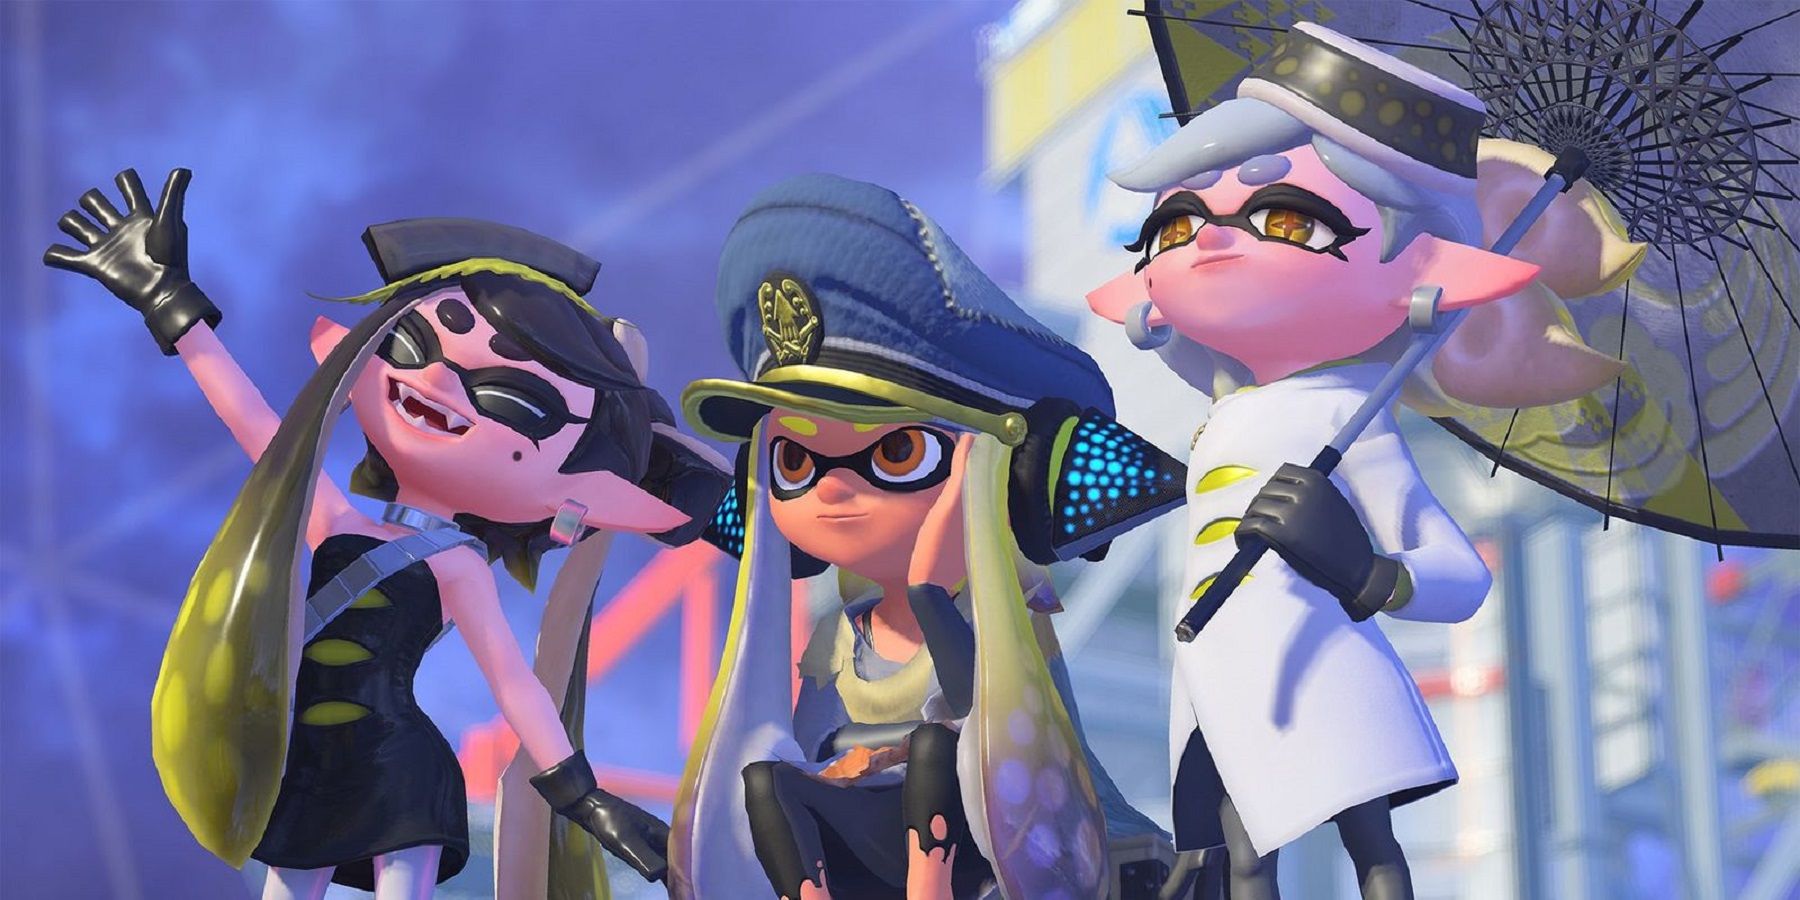 The squid sisters standing on either side of an inkling from Splatoon 3.